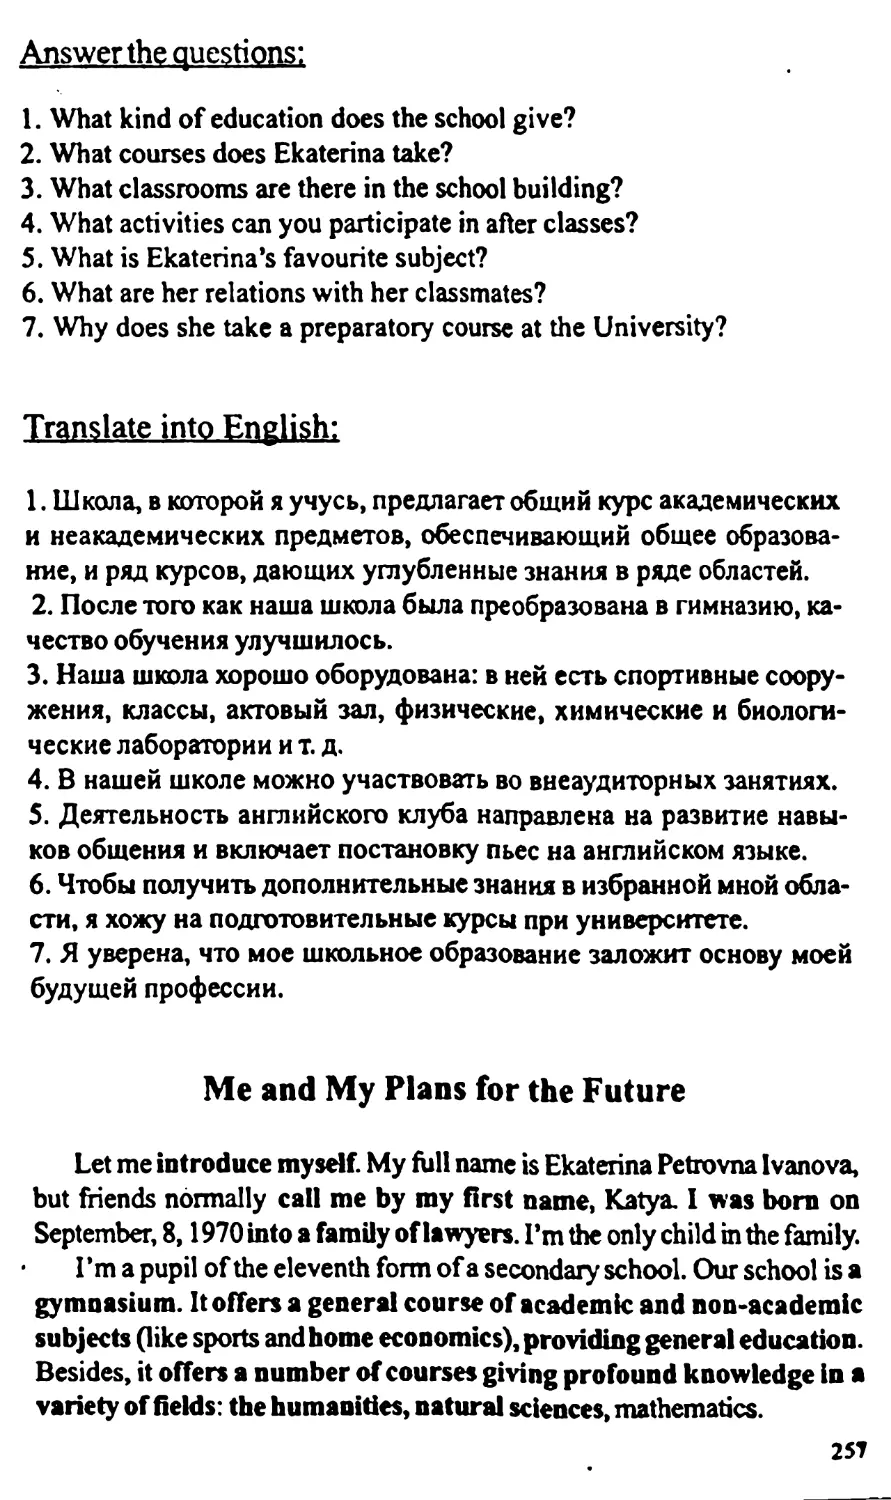 B. Me and Му Plans for the Future